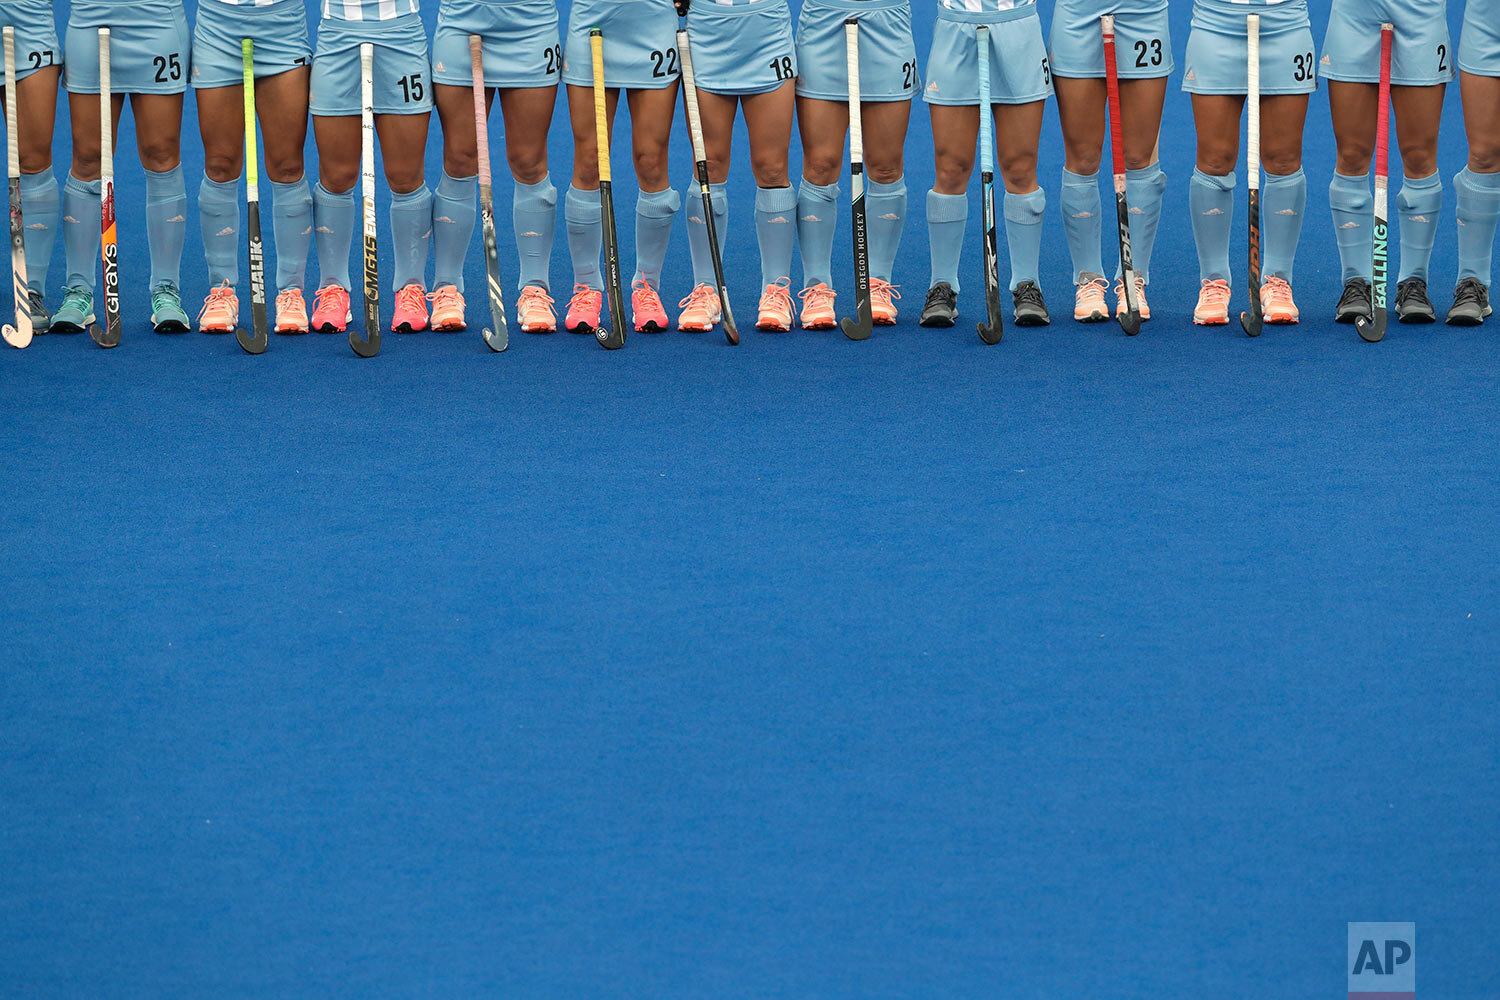  Argentina's hockey players stand in line during the playing of national anthems before their women's preliminaries pool WA against Canada at the Pan American Games in Lima, Peru, on July 31, 2019. Argentina won 3-0. (AP Photo/Silvia Izquierdo) 